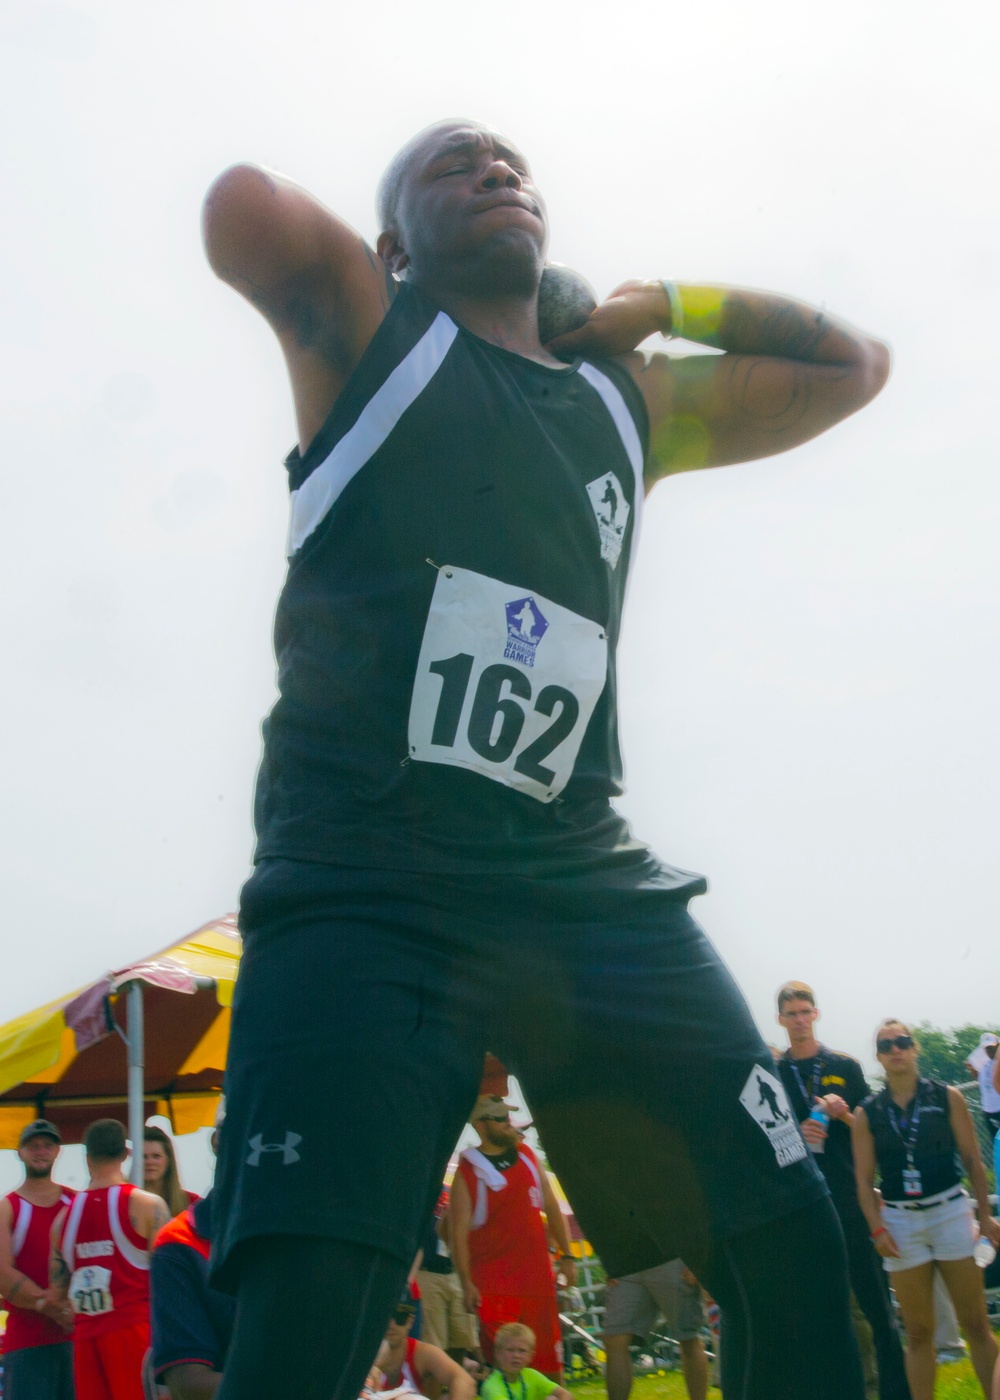 2015 Warrior Games from around the field